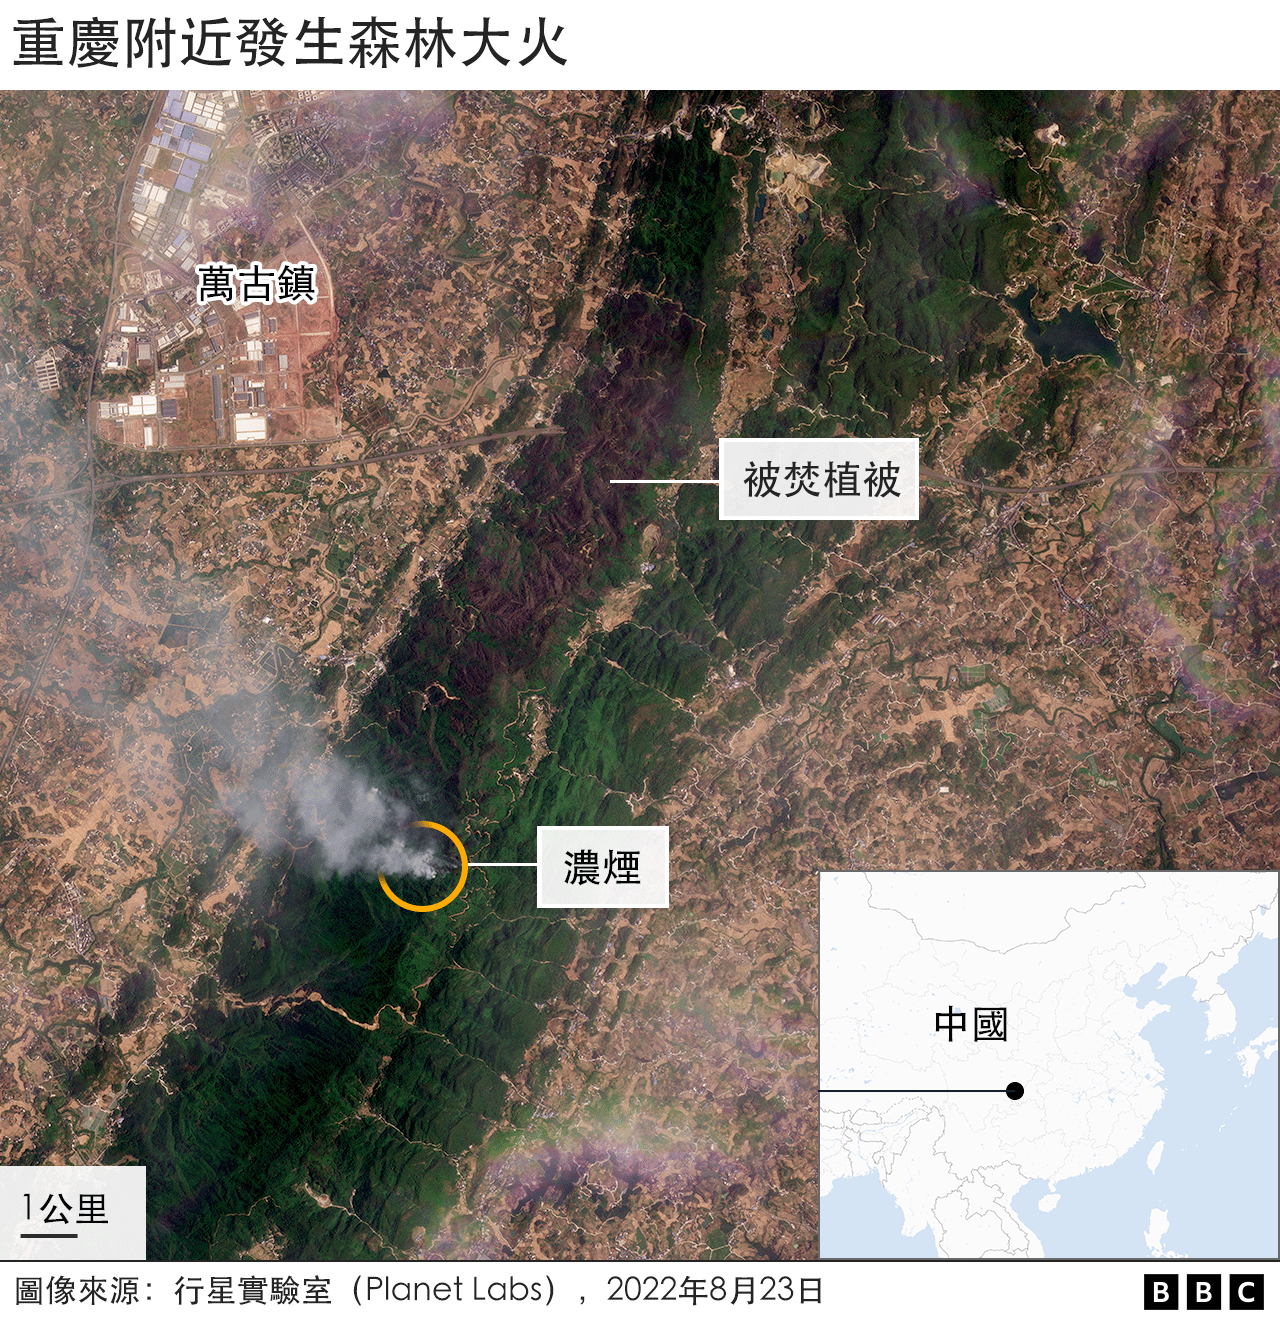 Satellite photos: Forest fires near Chongqing